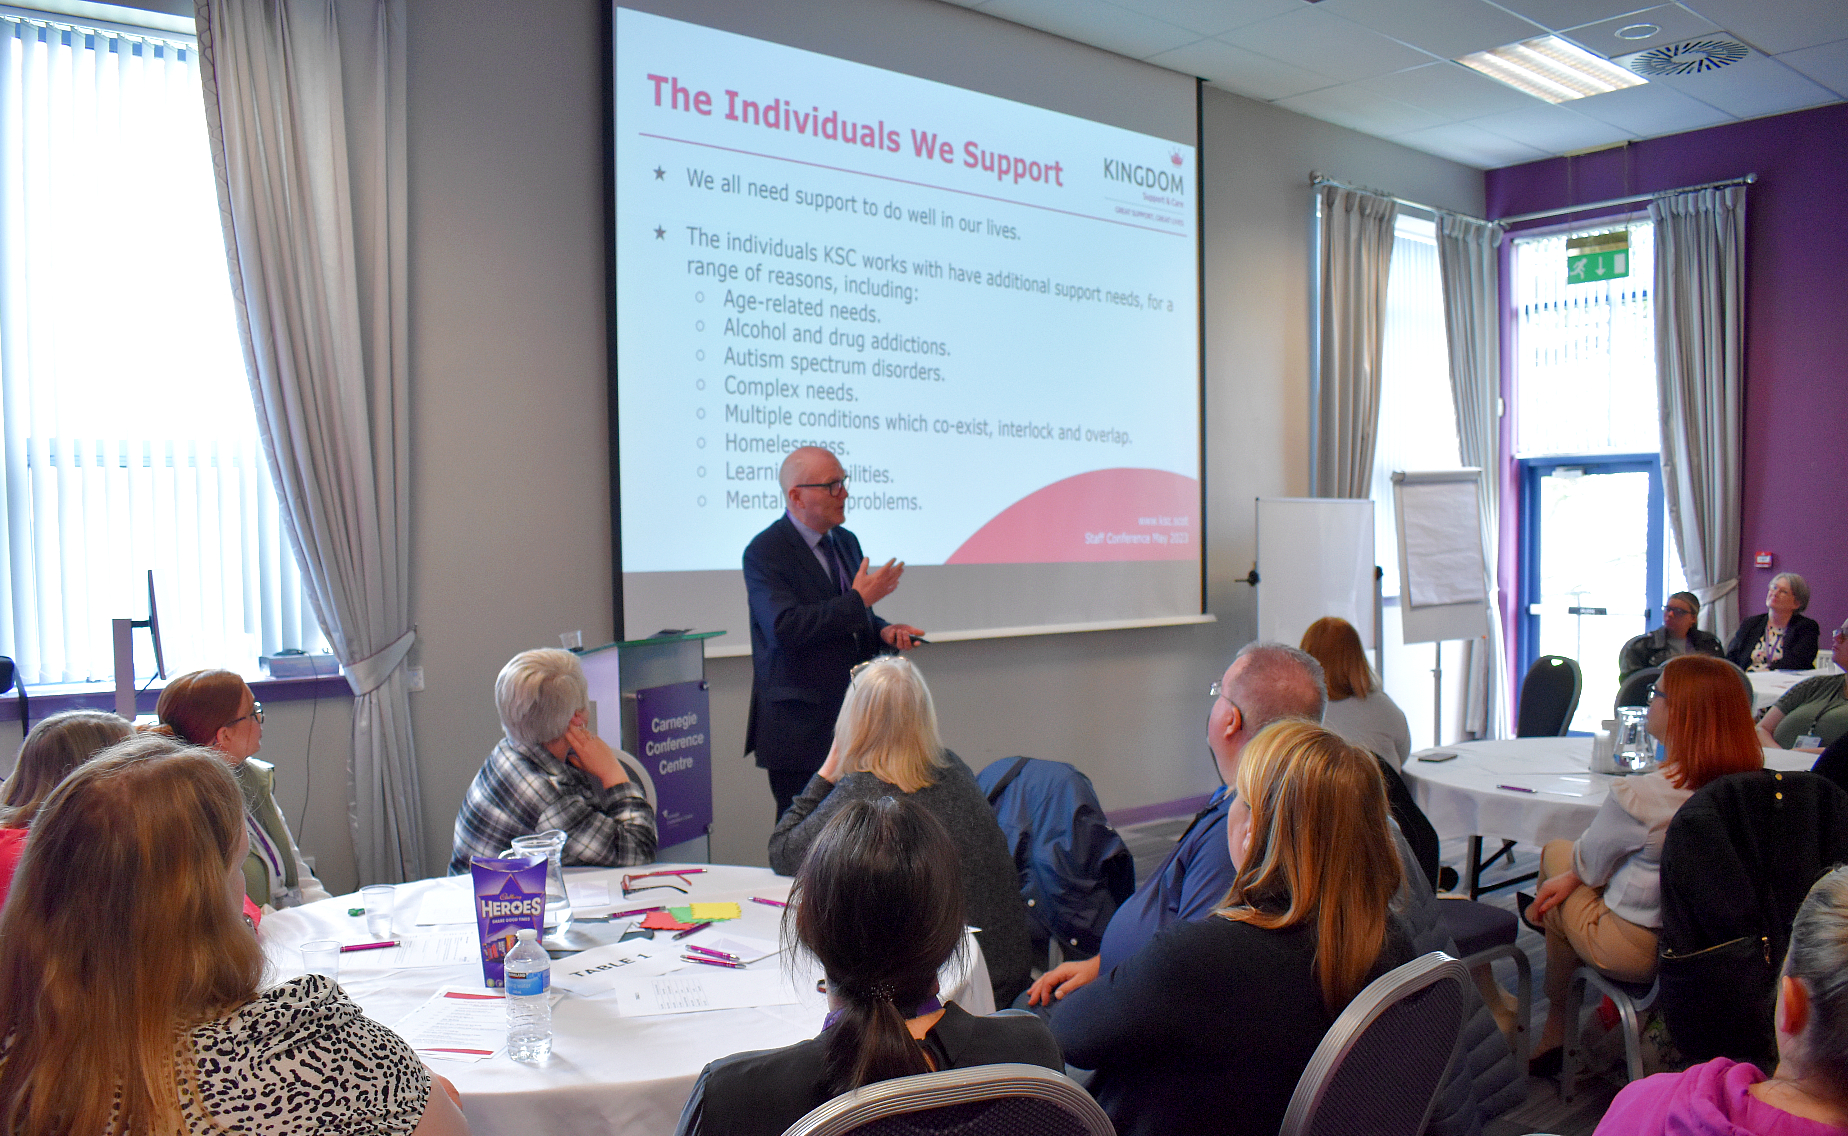 Kingdom Support & Care holds inaugural staff conference in Dunfermline